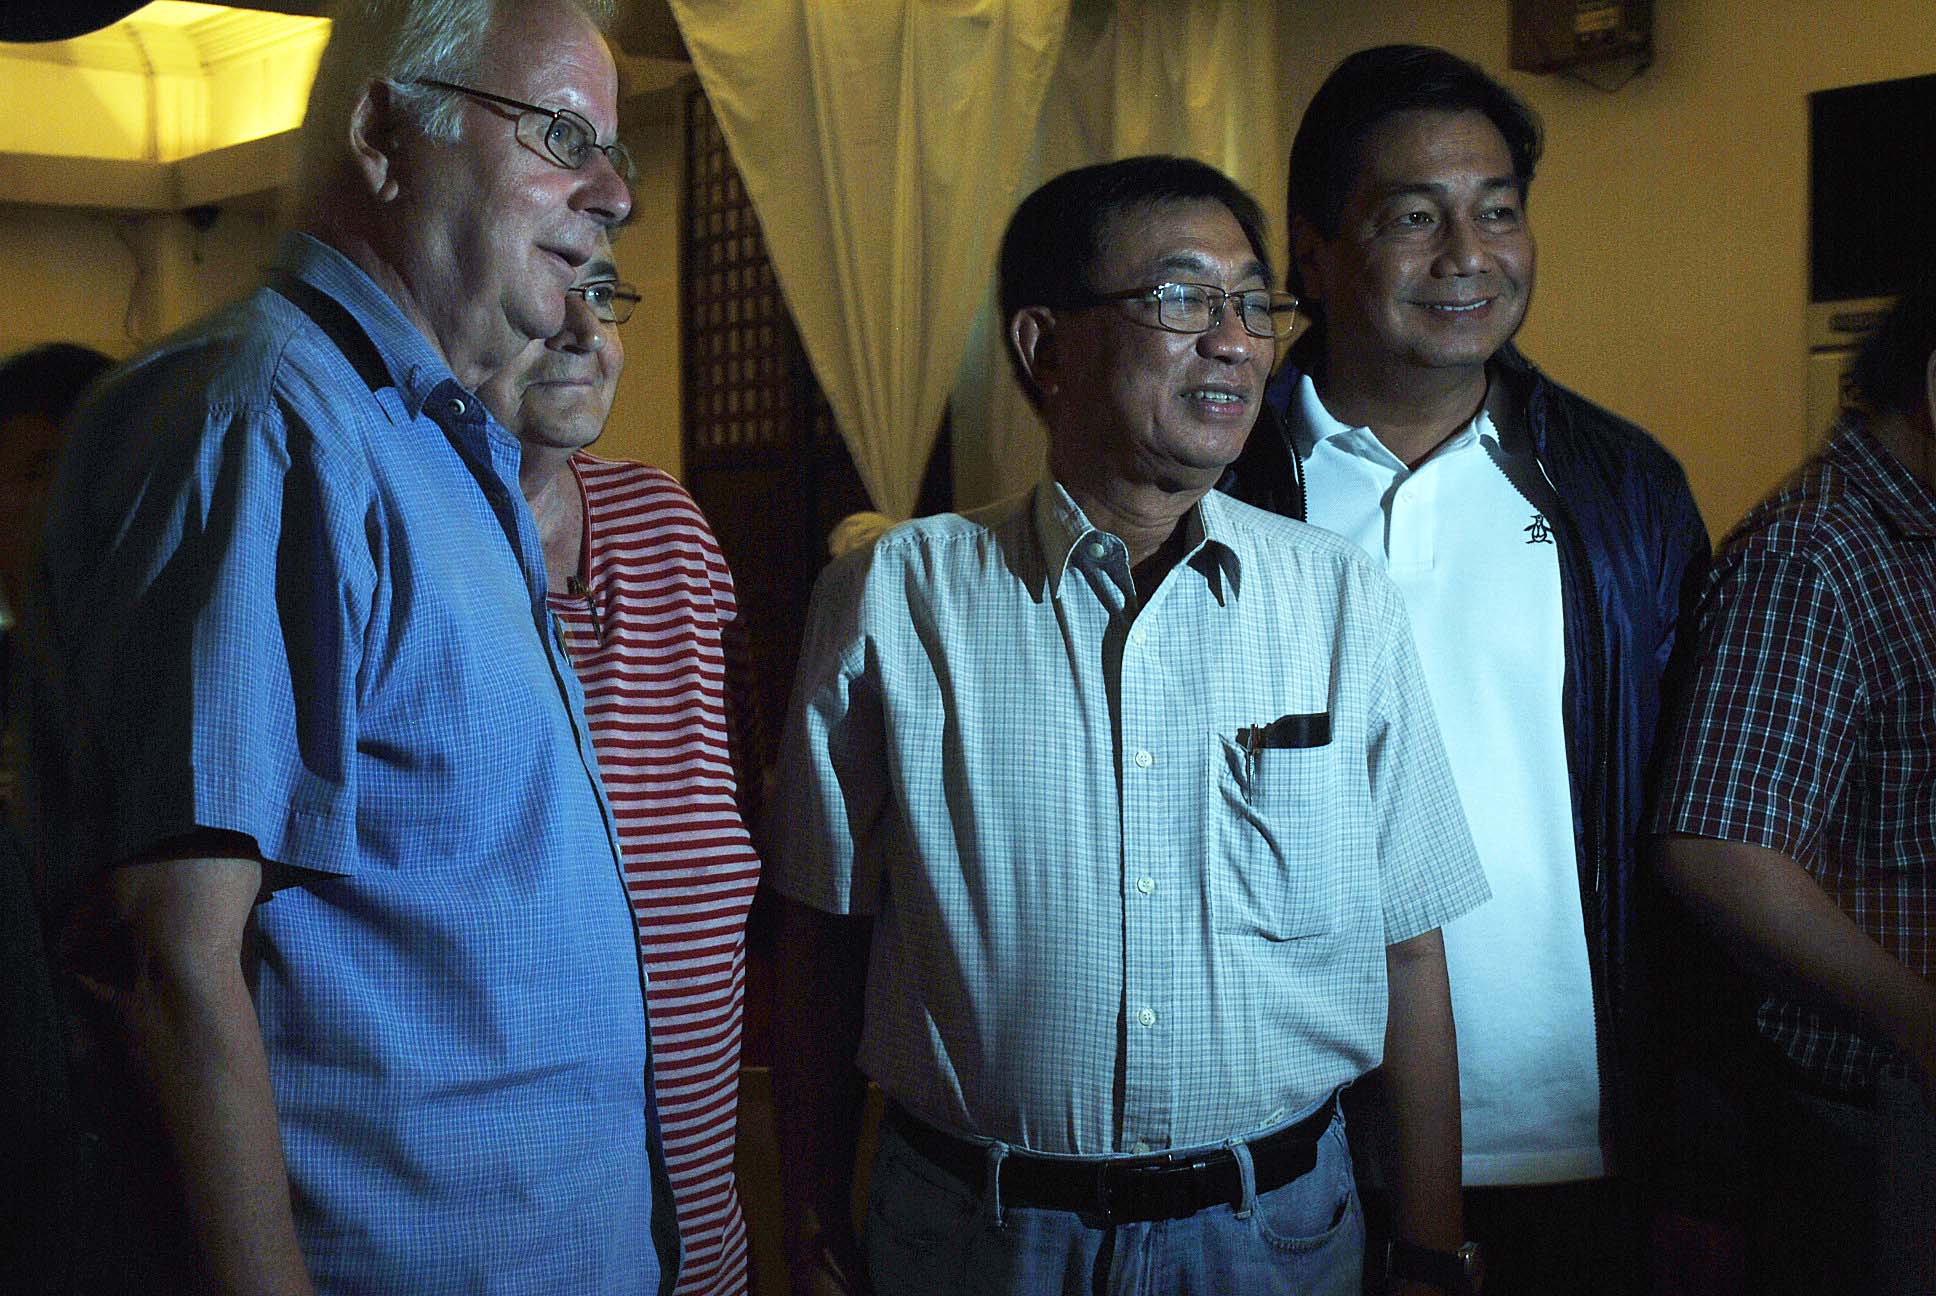 Health Secretary Enrique Ona (center) and  Javier, Leyte Mayor Leonardo “Sandy” Javier (right) together with two foreign donors during the signing of a memorandum of agreement for the repair of health facilities in the region damaged due to Yolanda.(RYAN GABRIEL “RANI” LLOSA ARCENAS)  